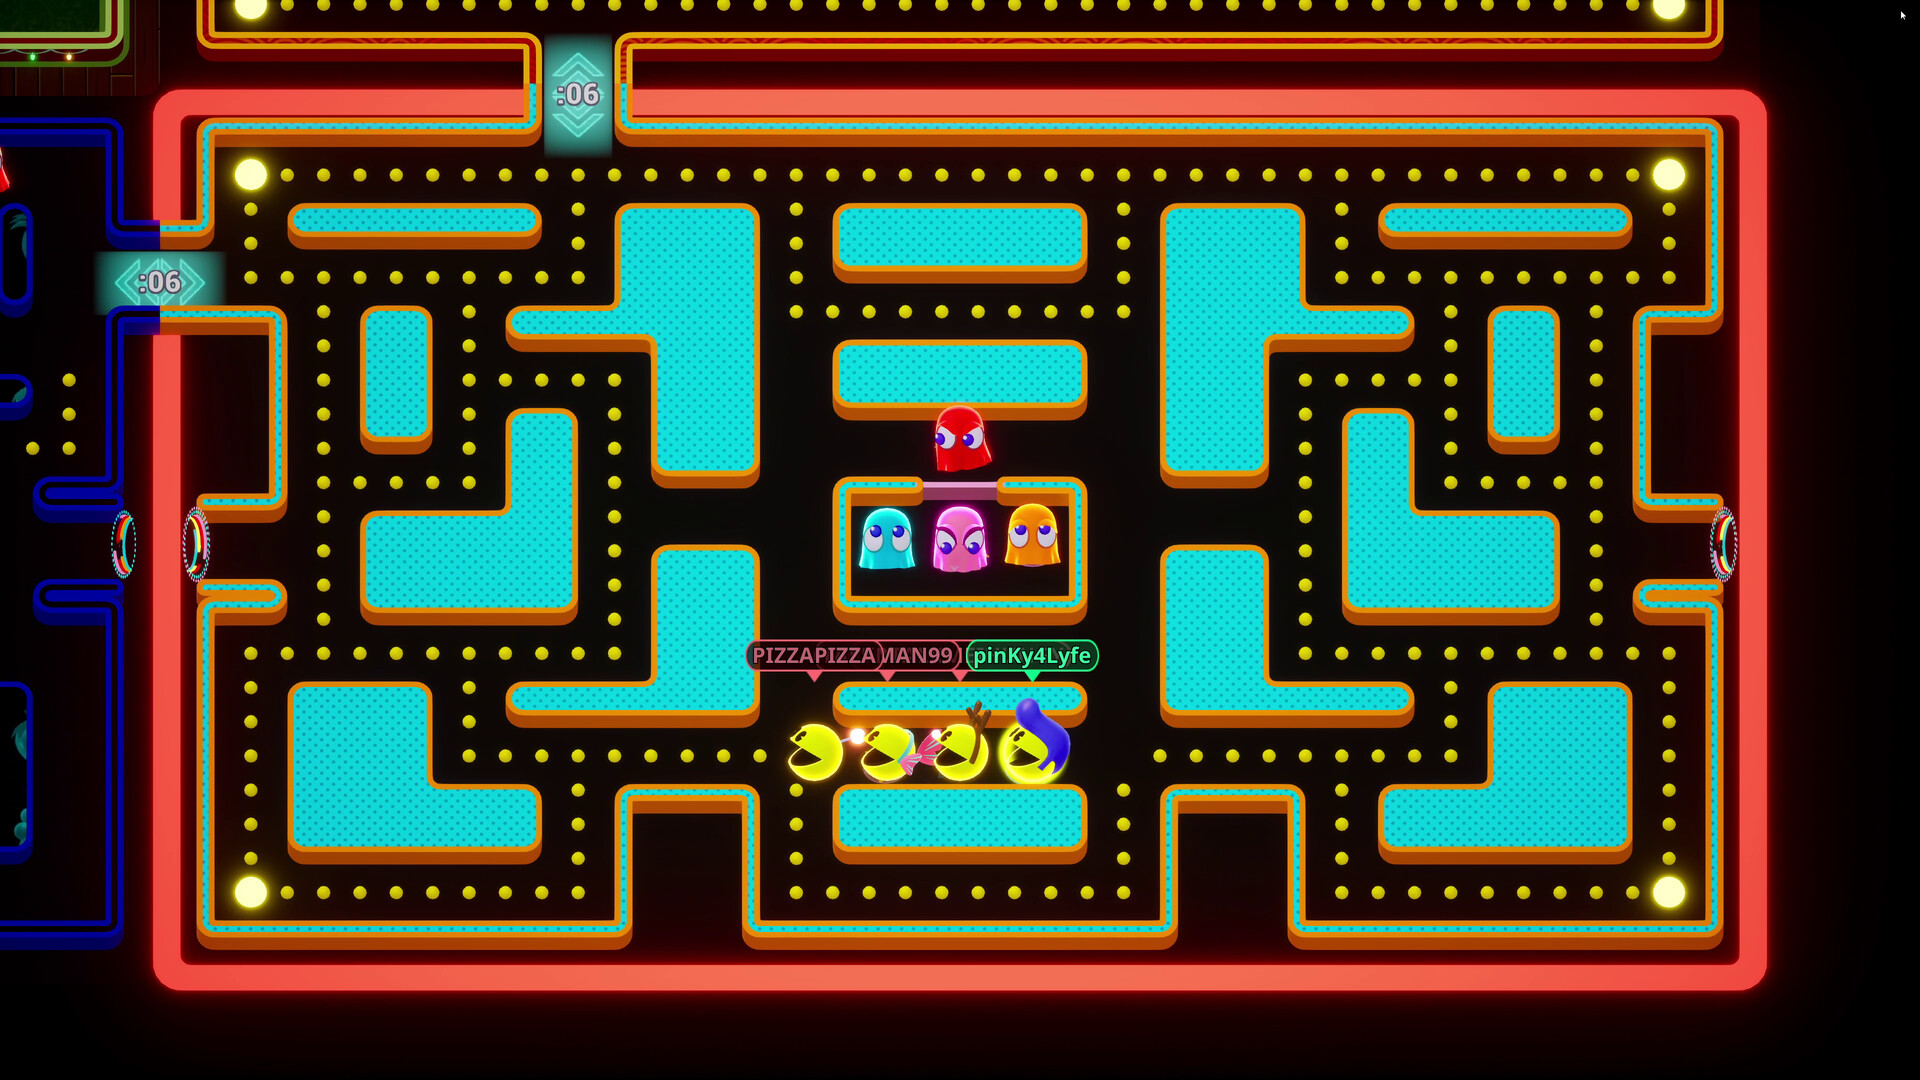 Pac-Man 99 Is a Free Pac-Man Battle Royale Available Now for